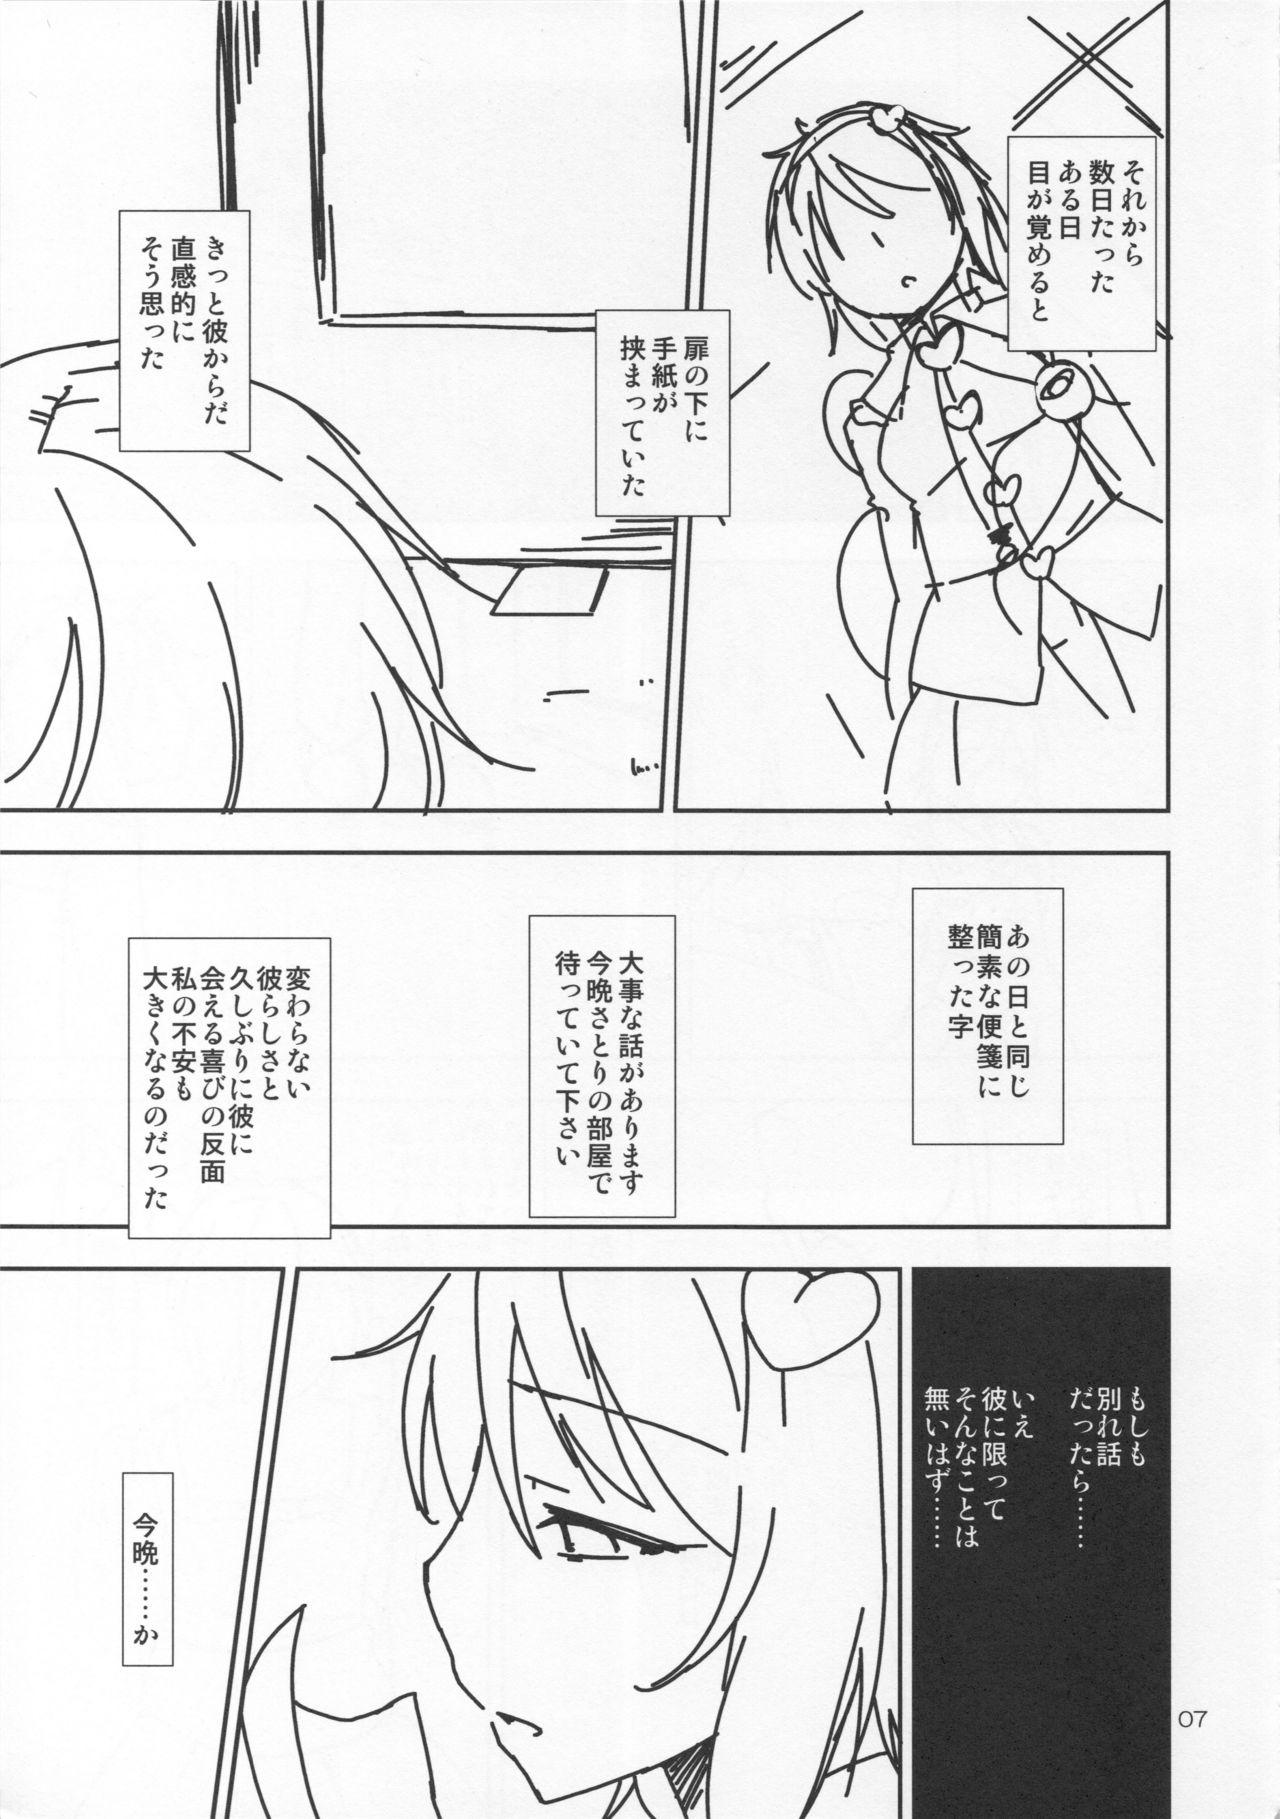 Fuck Com Urakoi 5 Preview Ban - Touhou project Married - Page 6